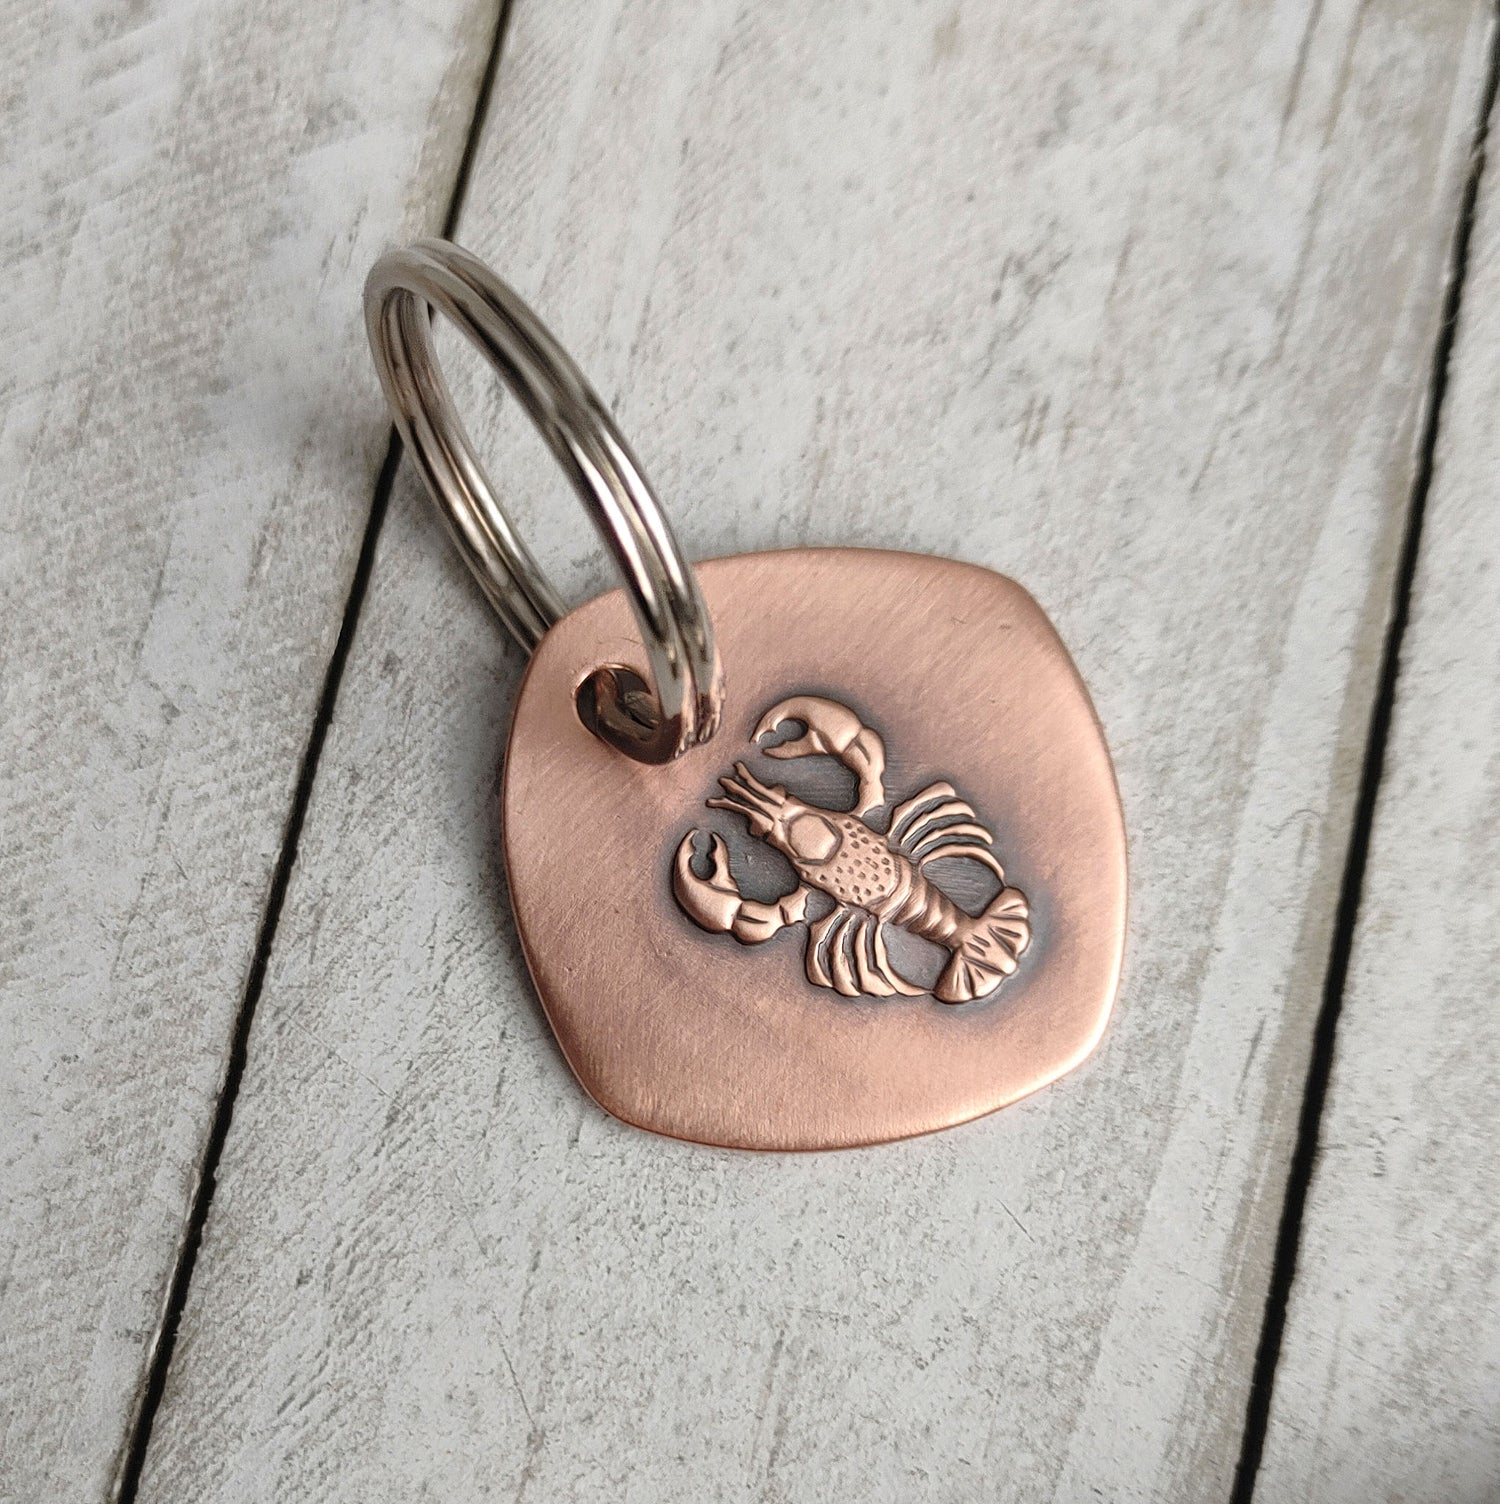 Copper keychain with a detailed raised impression of a lobster. The claws, legs, and tail are all clearly defined. The keychain is a rounded square shape.